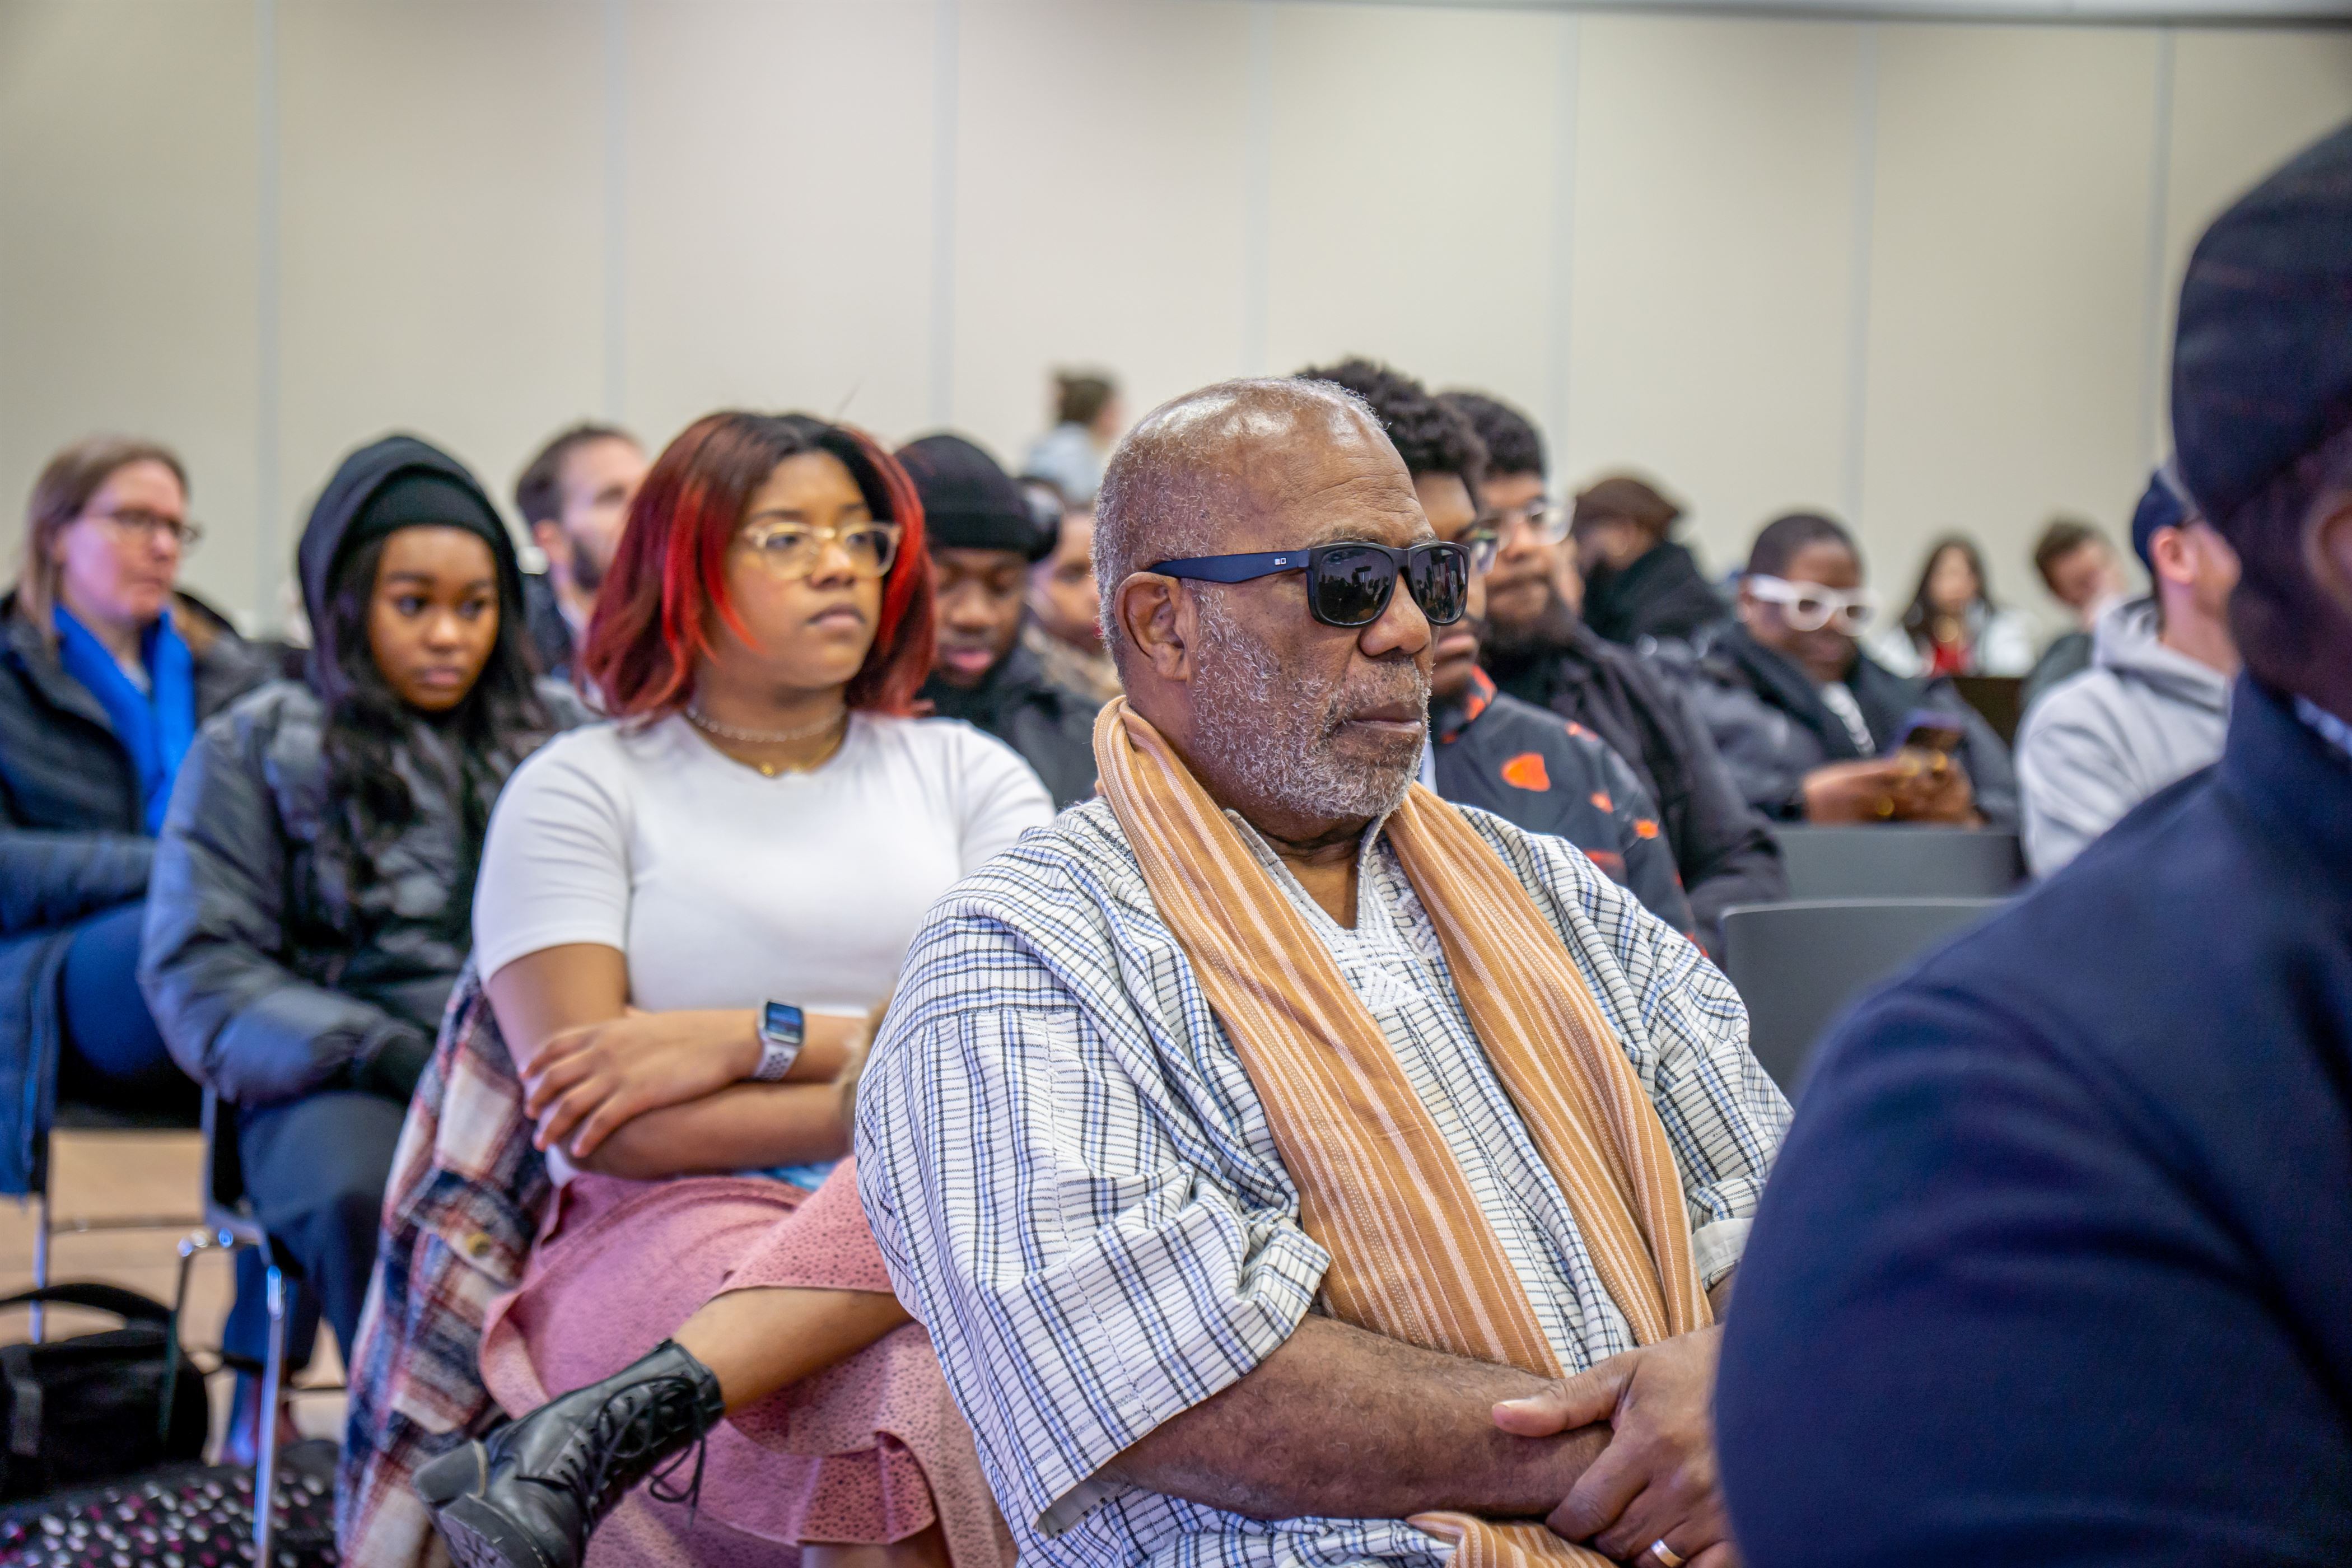 People listen to the speakers discuss Black leaders. Lynise Olivacce | The Montclarion